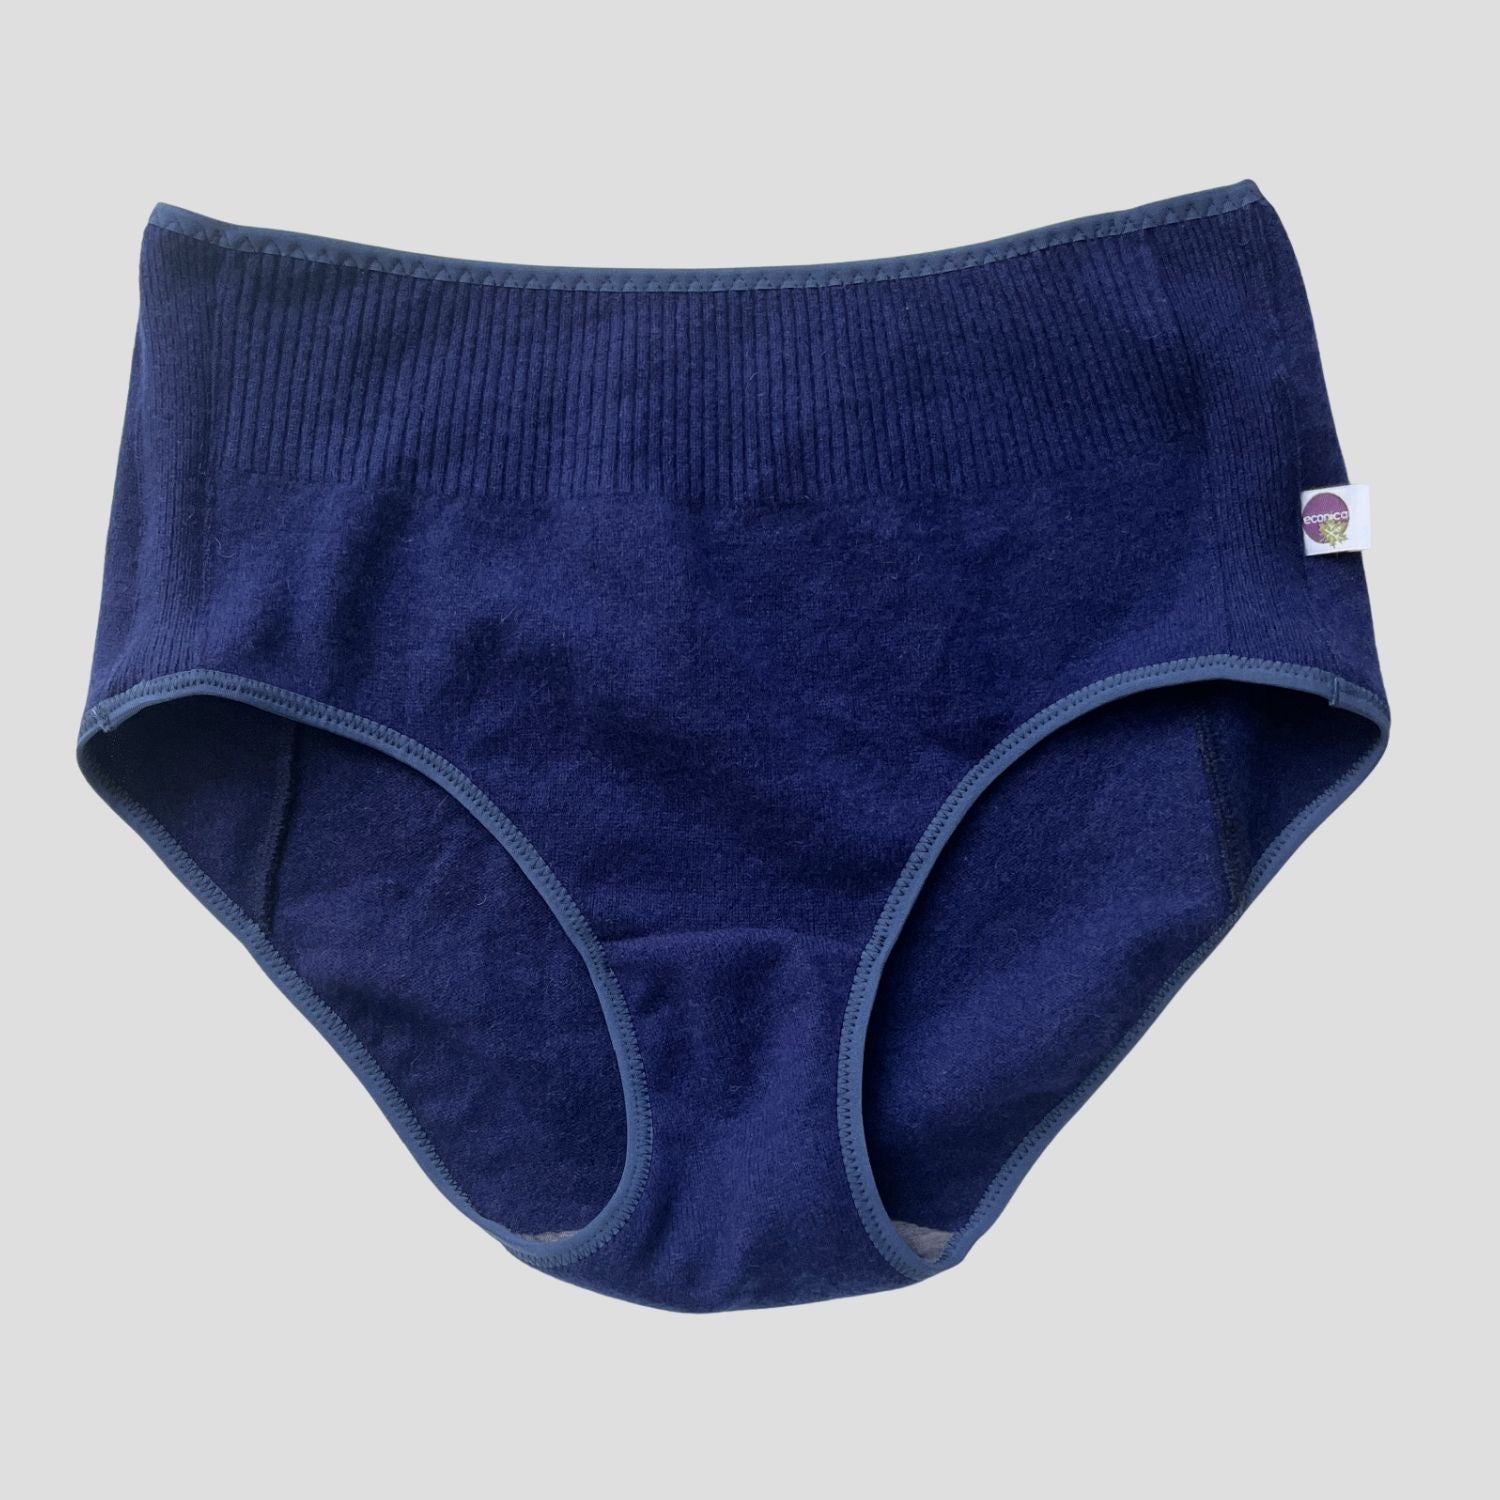 Merino wool Women's brief size Large | Ready-To-Ship